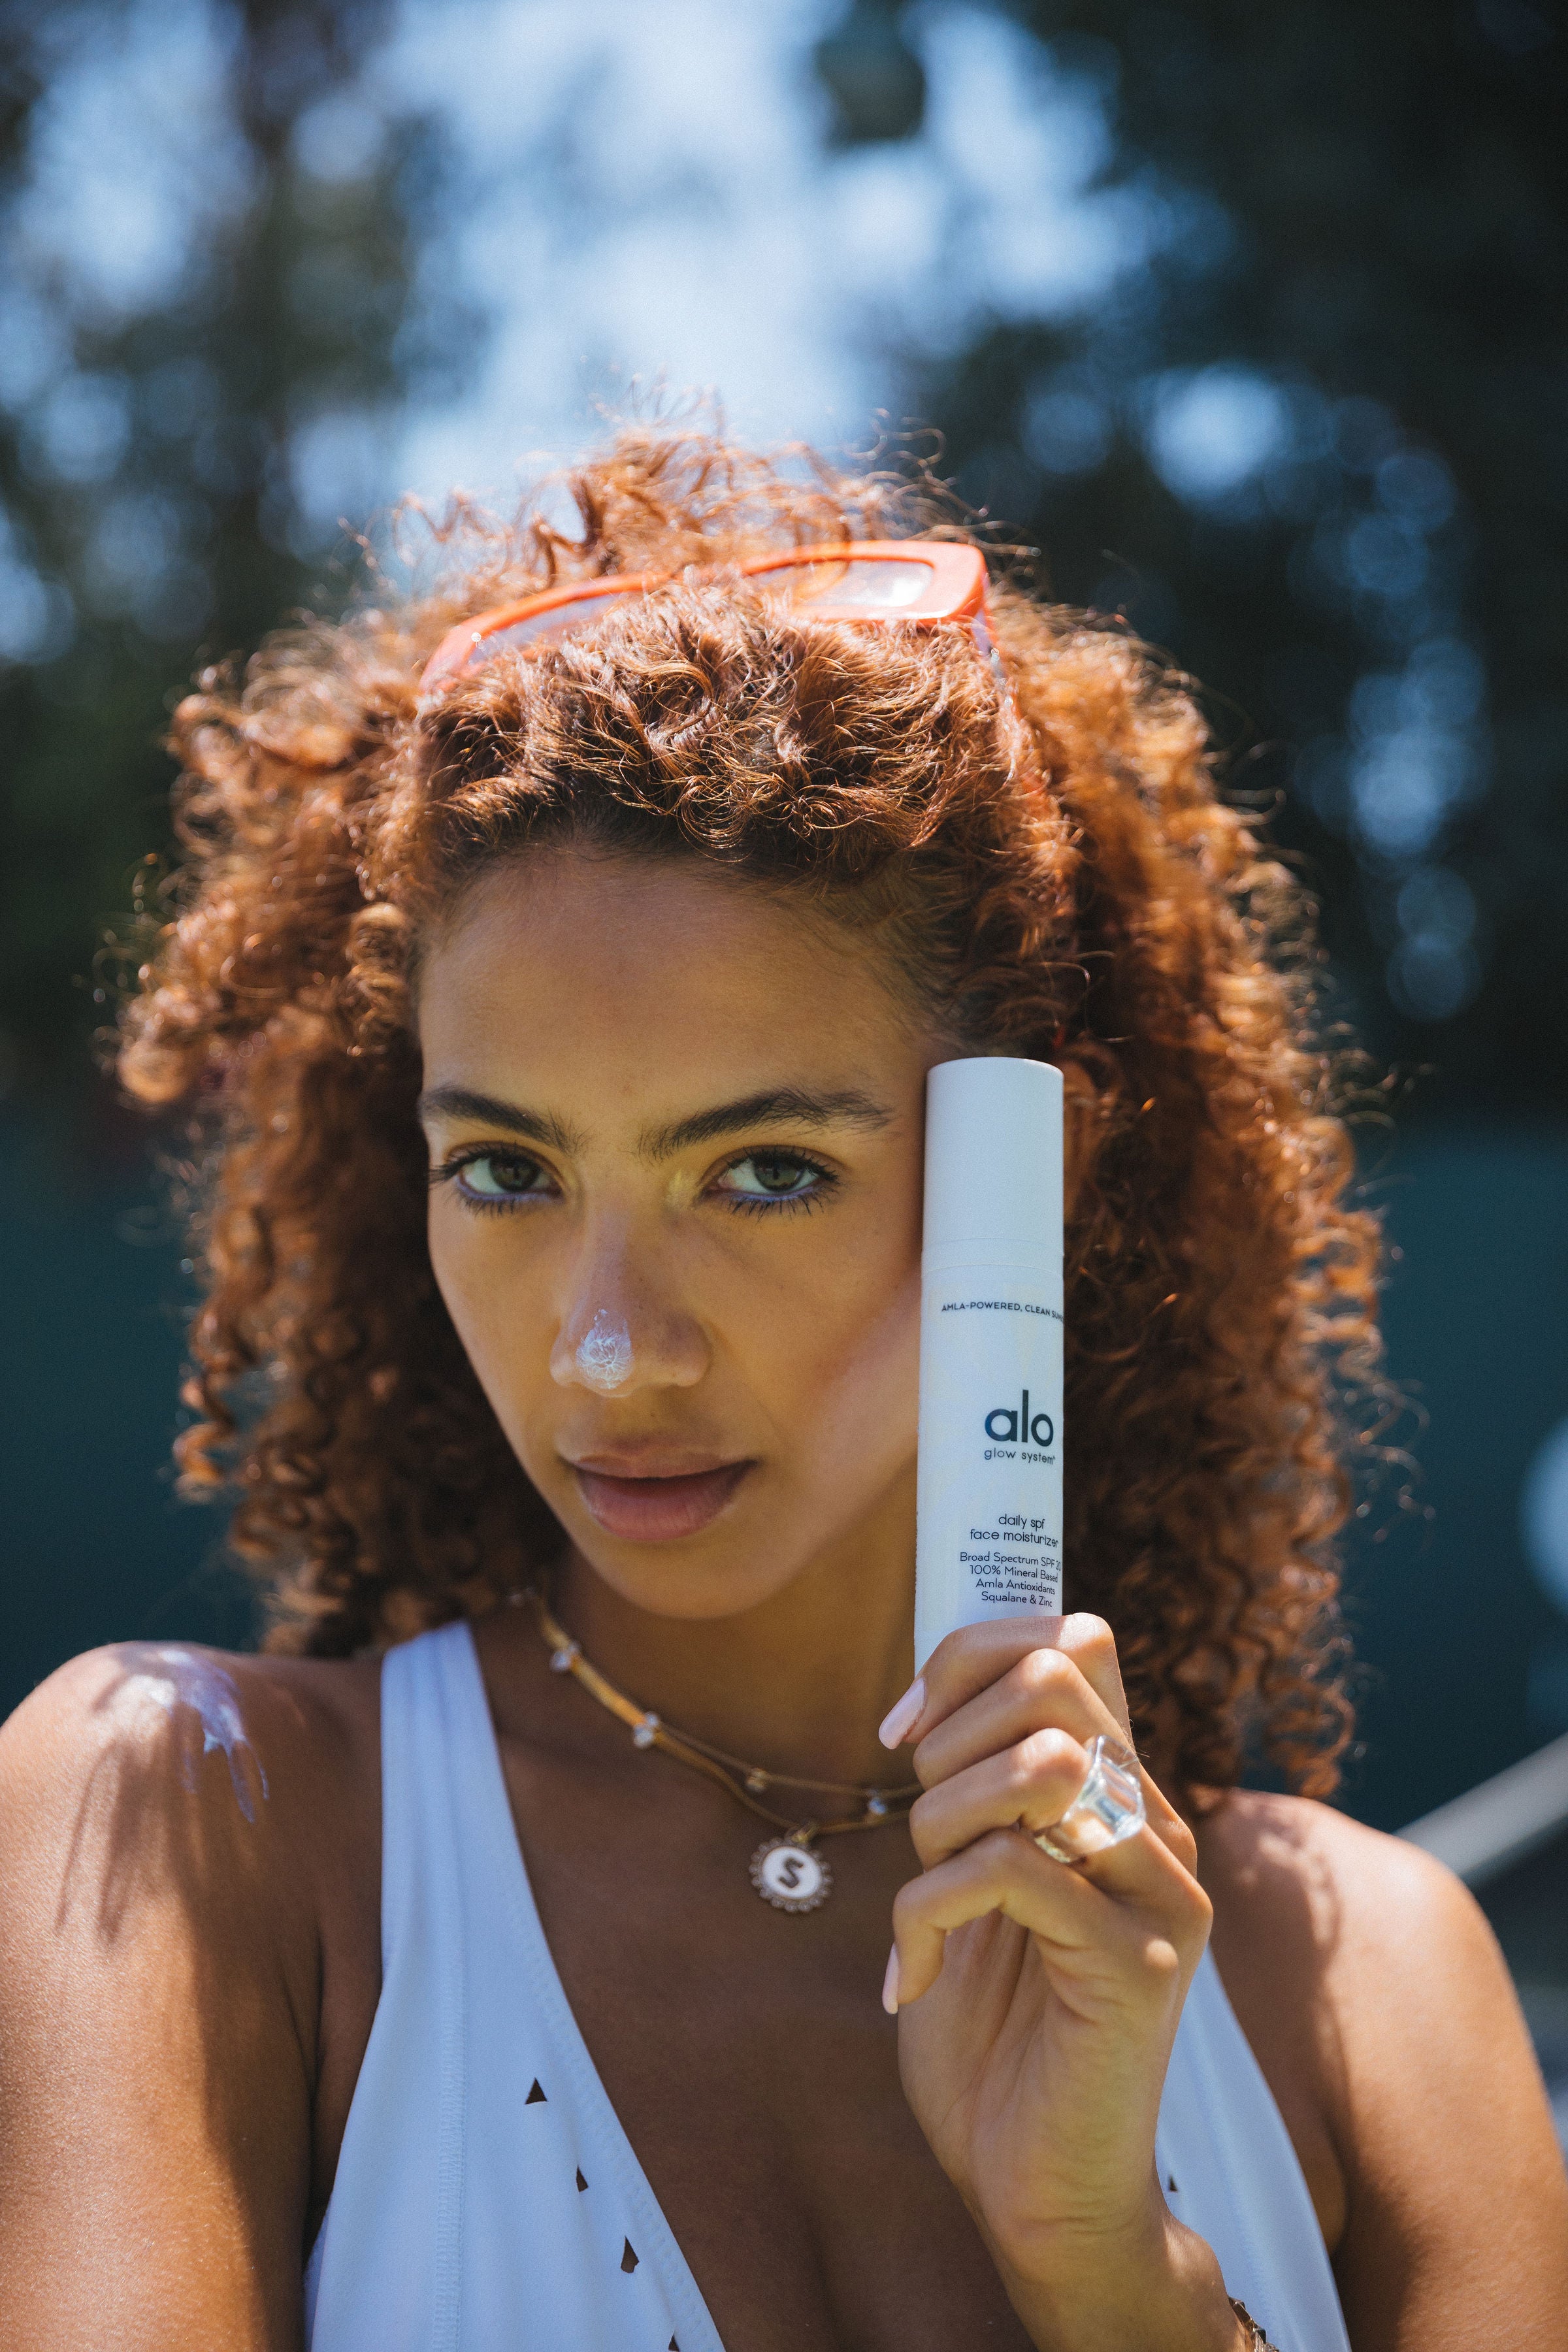 Woman with curly red hair poses with Daily Moisturizing SPF bottle in her hand and white cream dotted on her nose. 